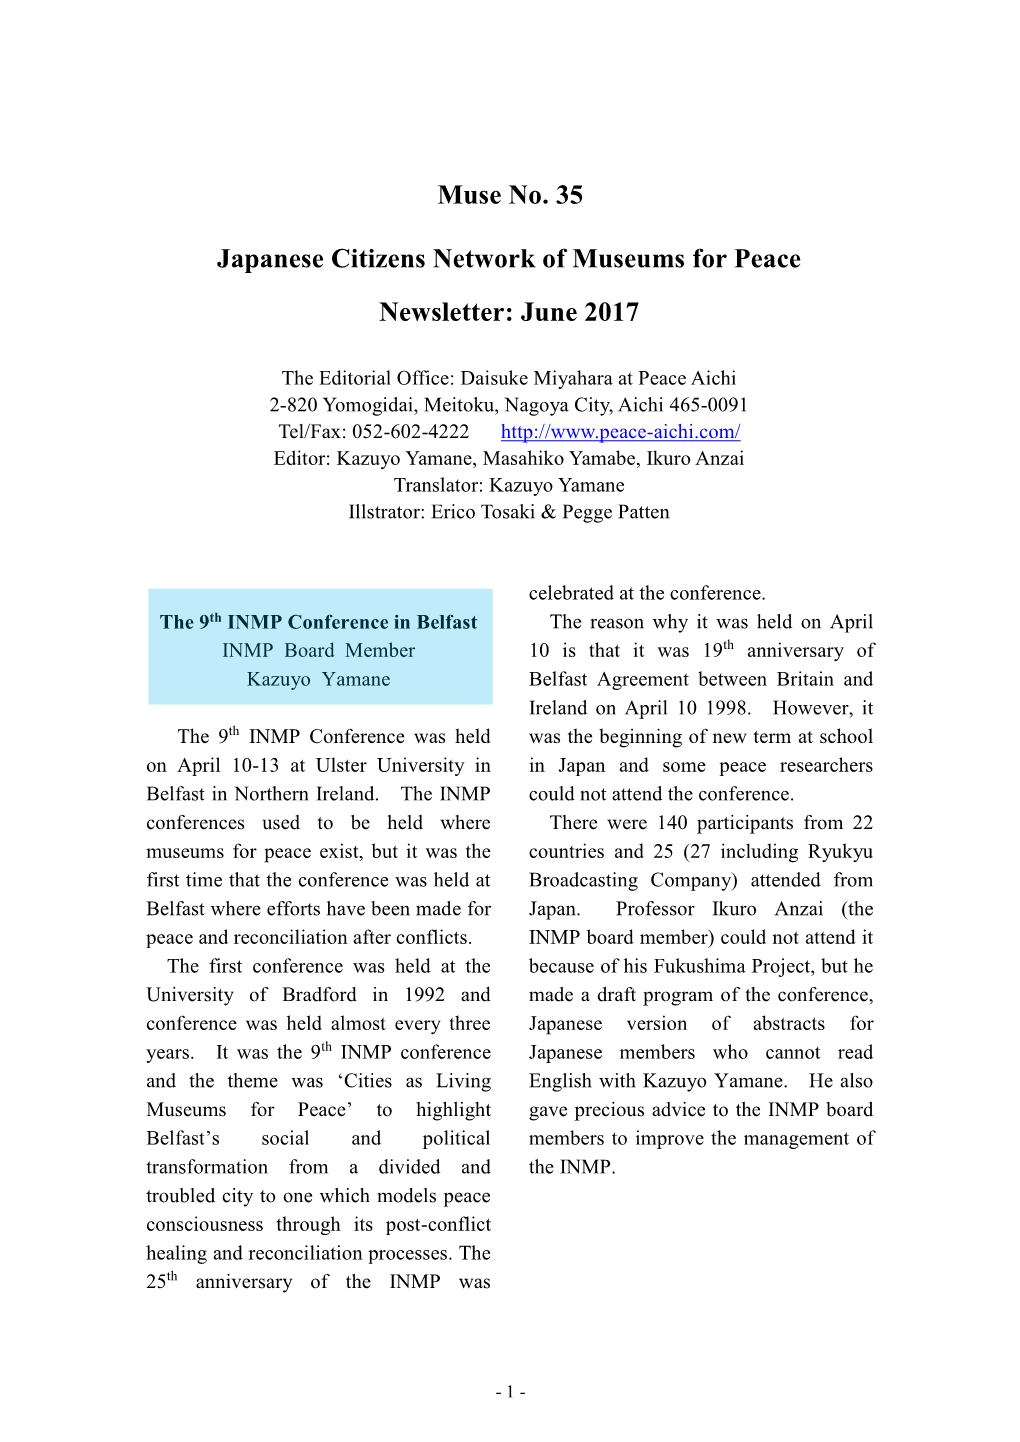 Muse No. 35 Japanese Citizens Network of Museums for Peace